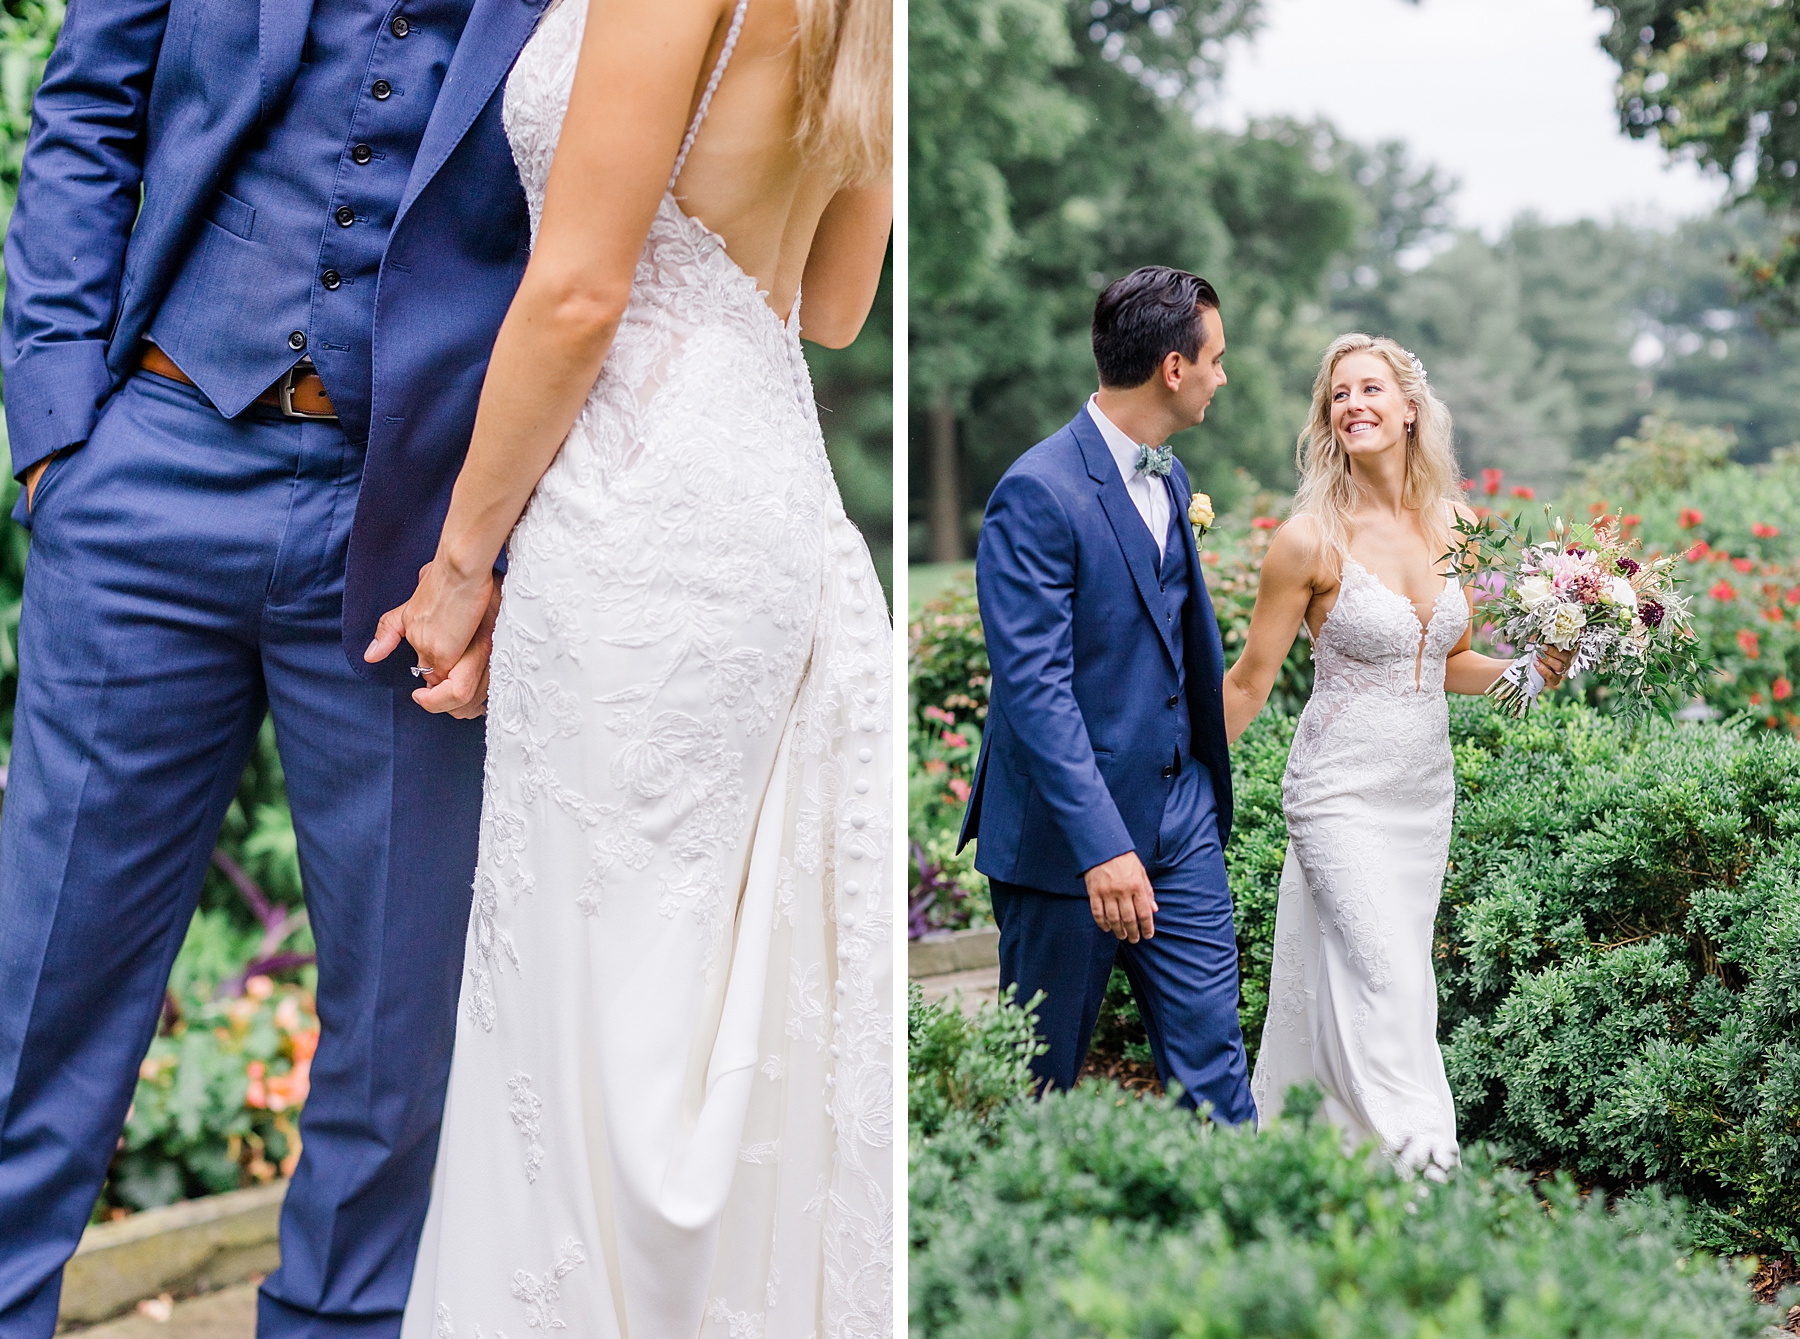 candid portraits of couple walking through the garden on wedding day 